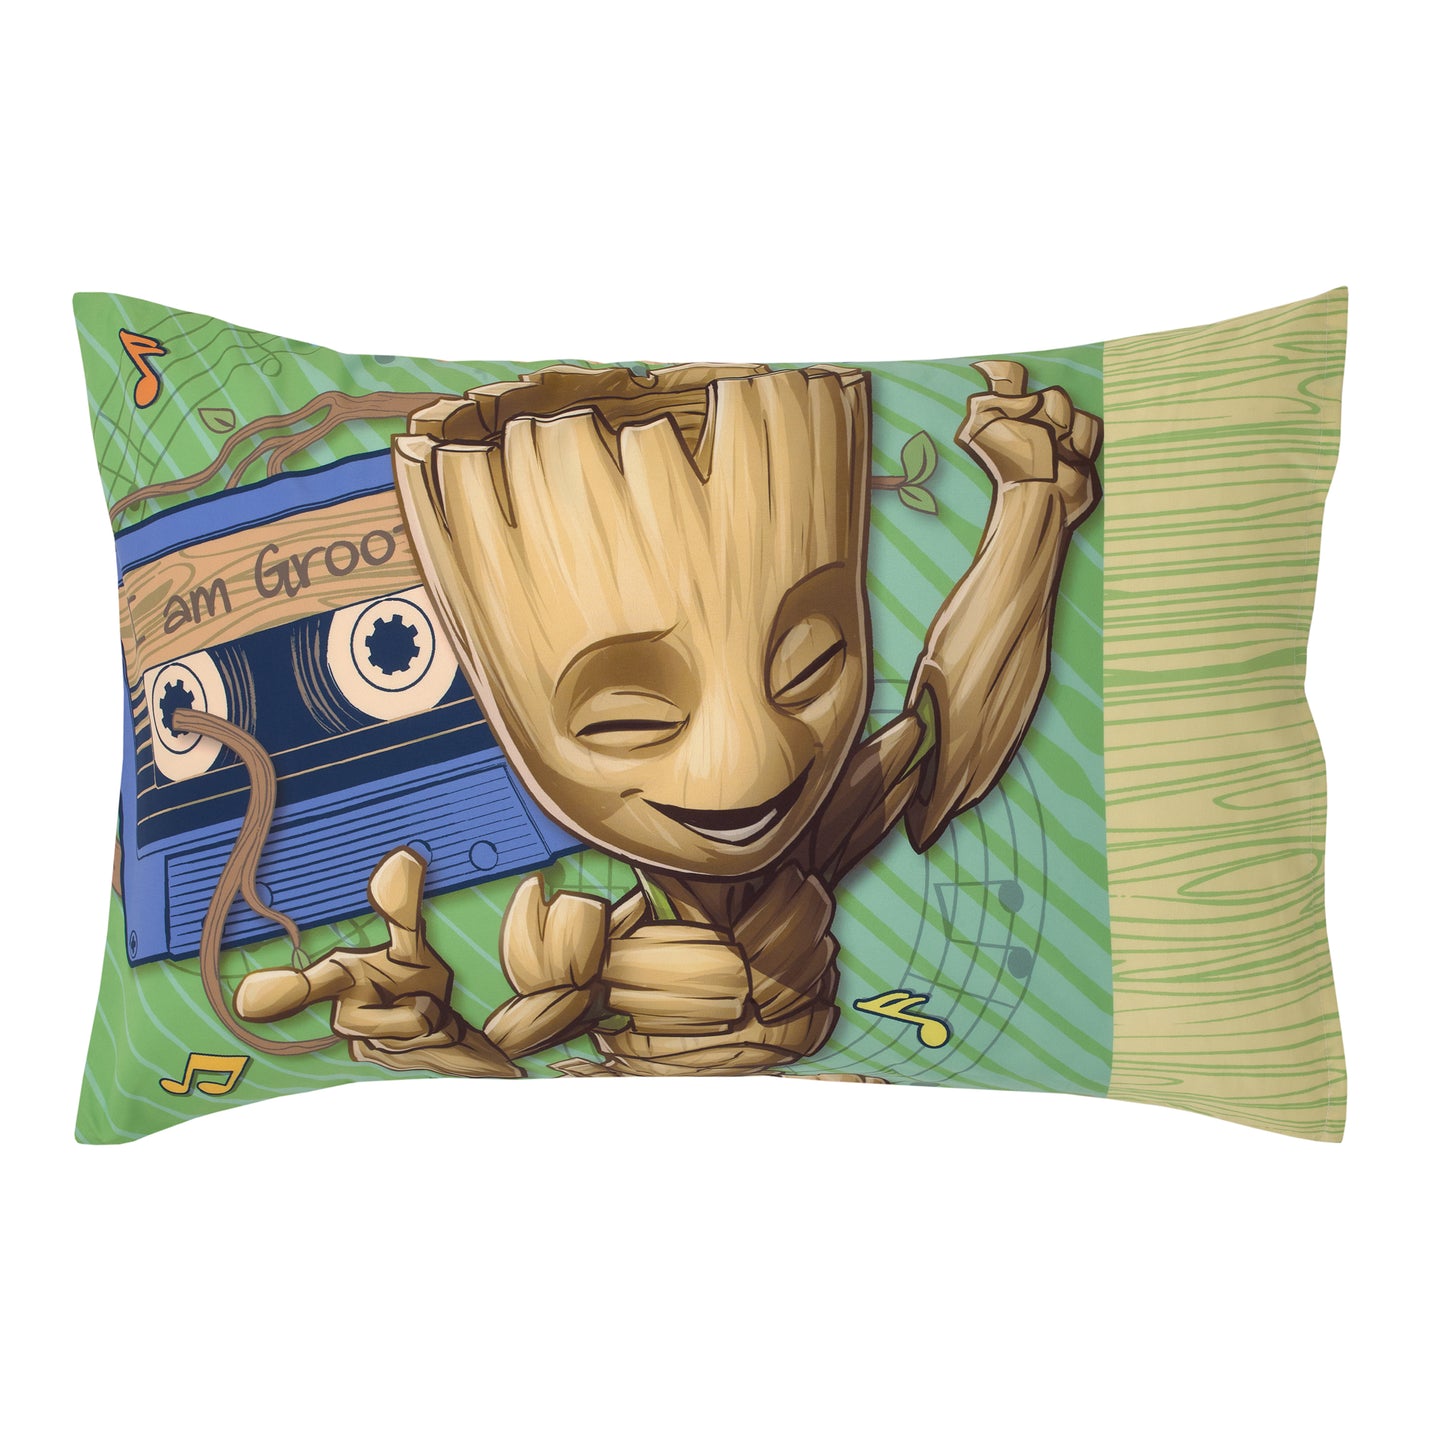 Marvel Guardians of the Galaxy I Am Groot Green and Blue 4 Piece Toddler Bed Set - Comforter, Fitted Bottom Sheet, Flat Top Sheet, and Reversible Pillowcase